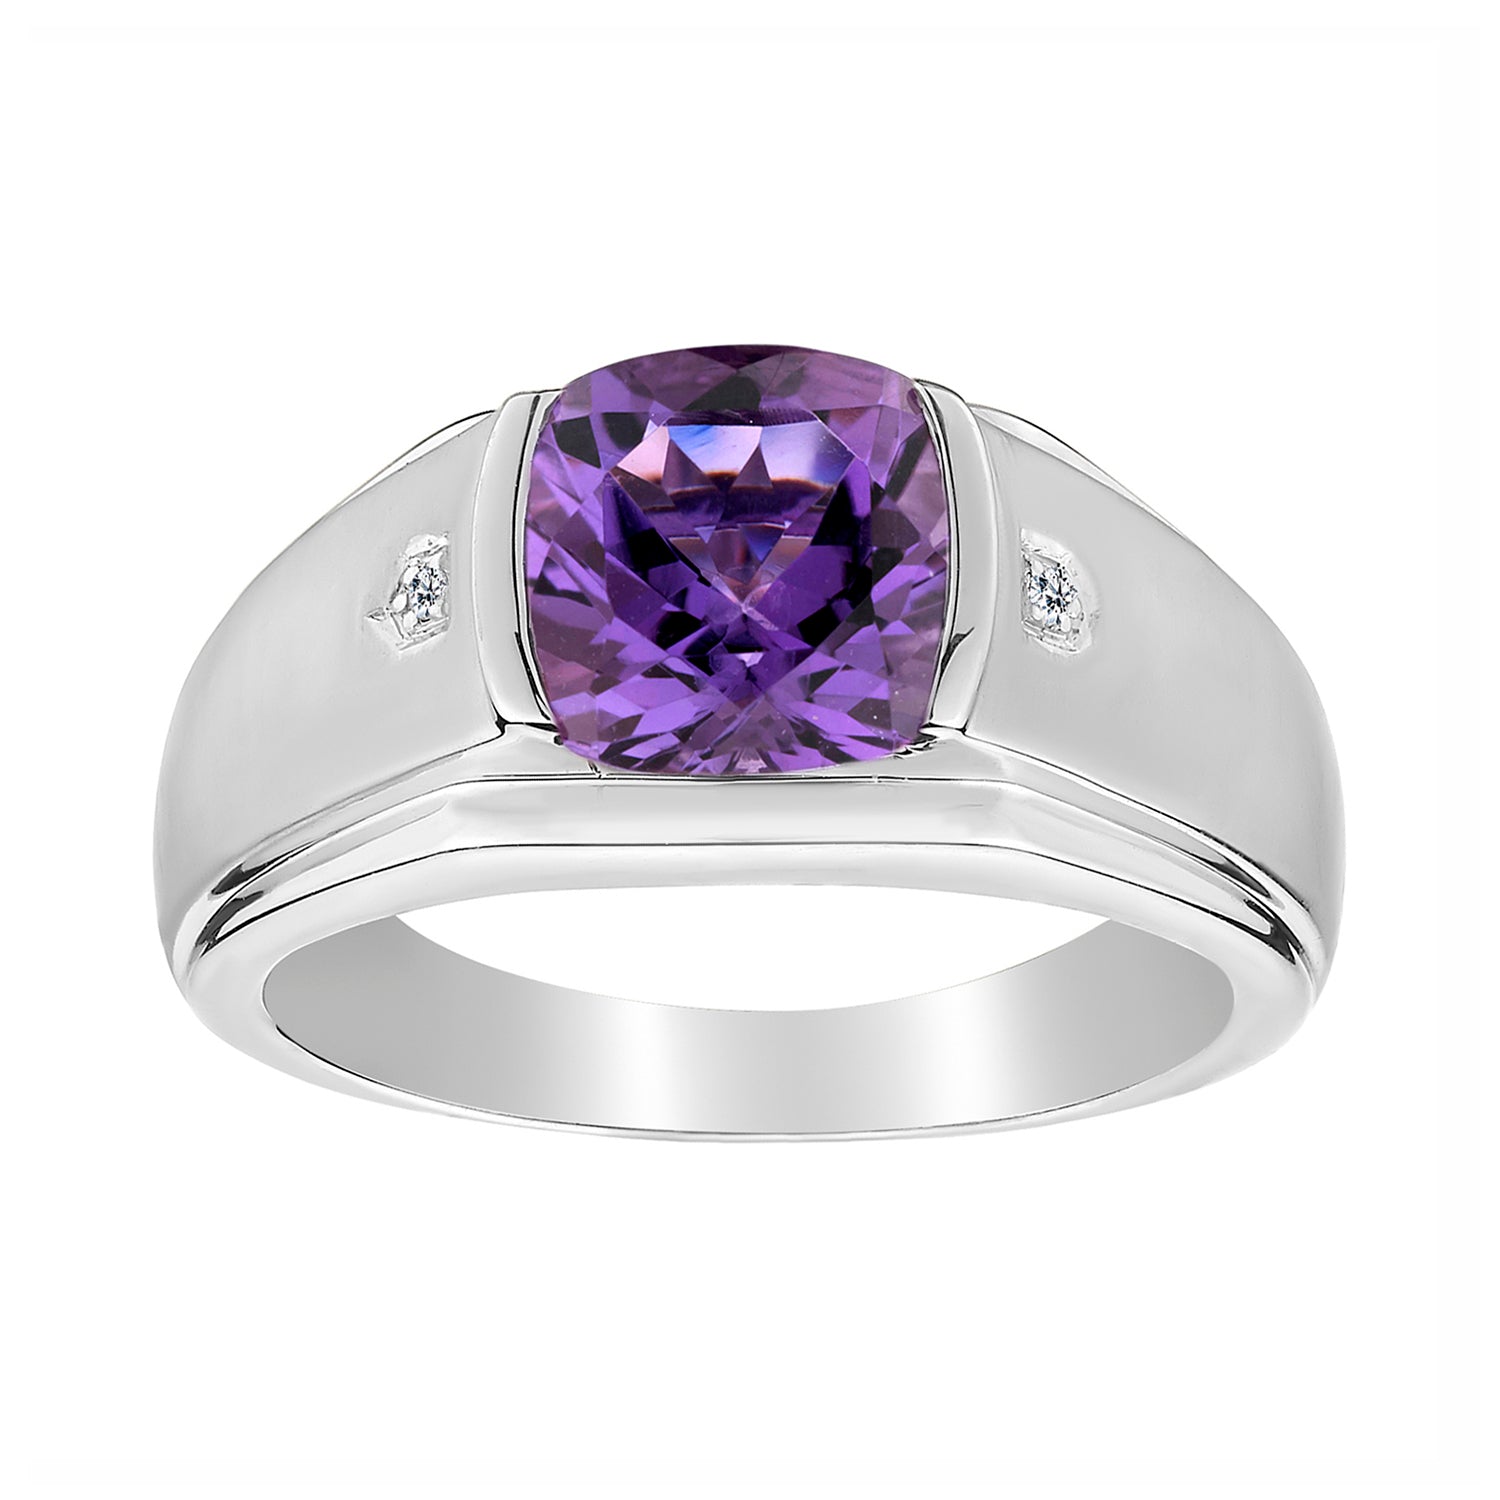 .015 CARAT DIAMOND AND GENUINE AMETHYST GENTLEMAN'S RING, SILVER....................NOW - Griffin Jewellery Designs